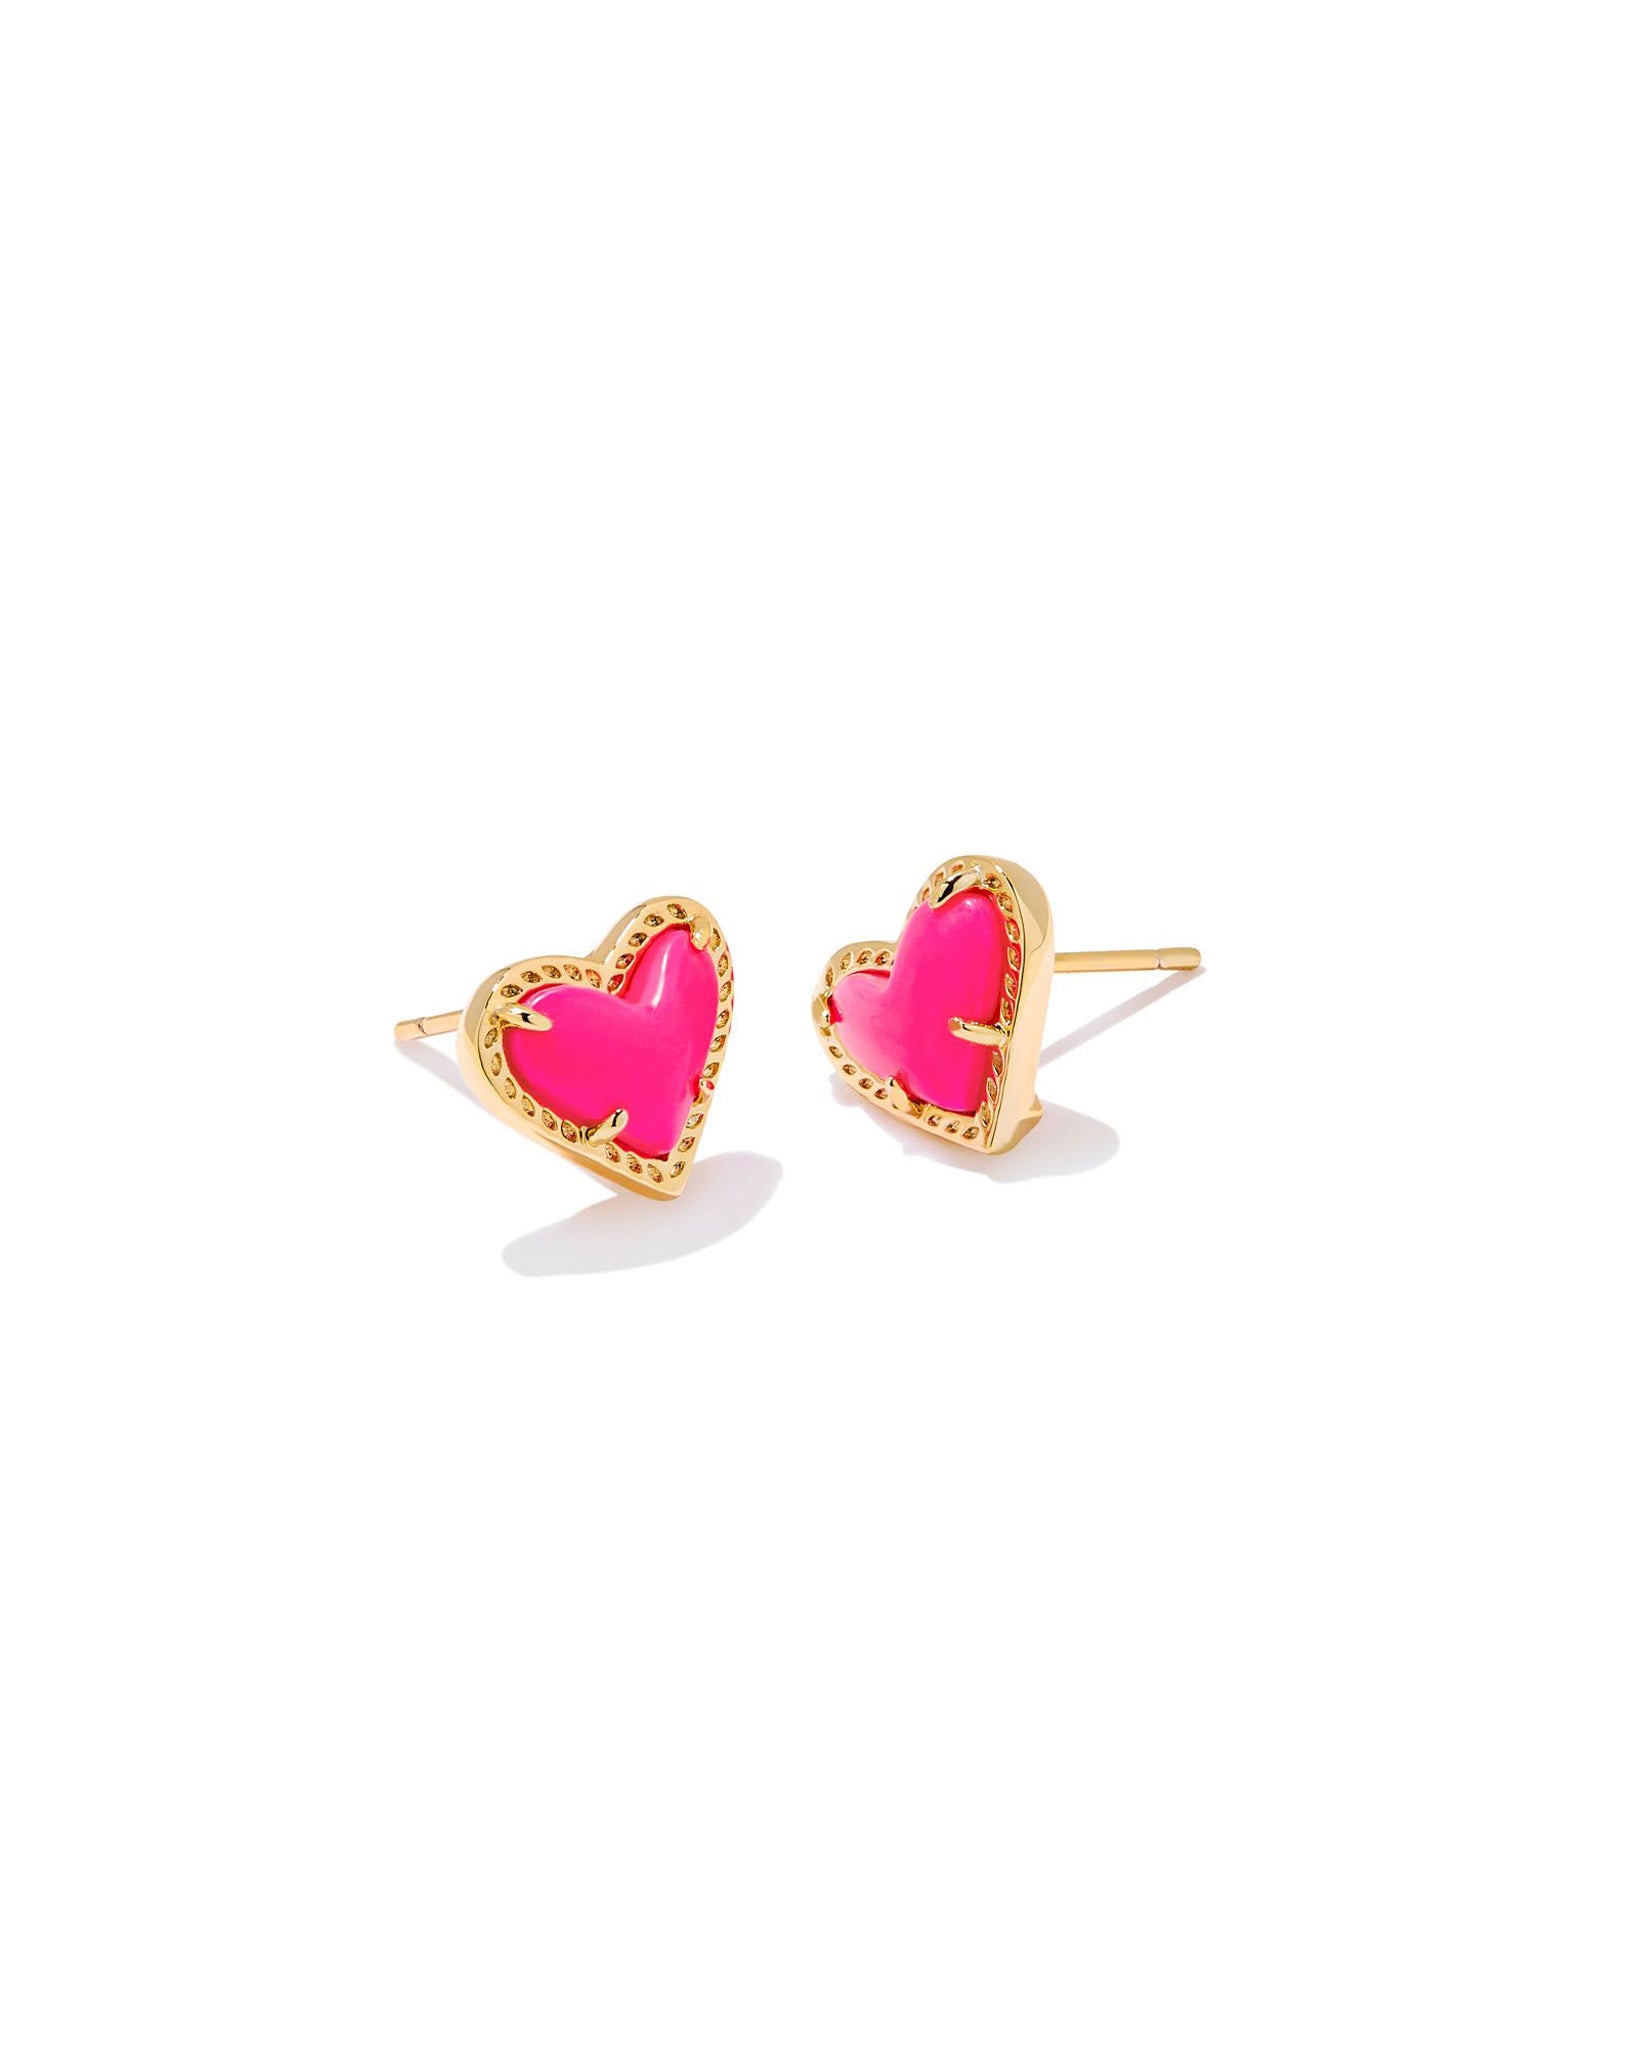 Kendra Scott Ari Heart Stud Earrings in Neon Pink Magnesite and Gold Plated